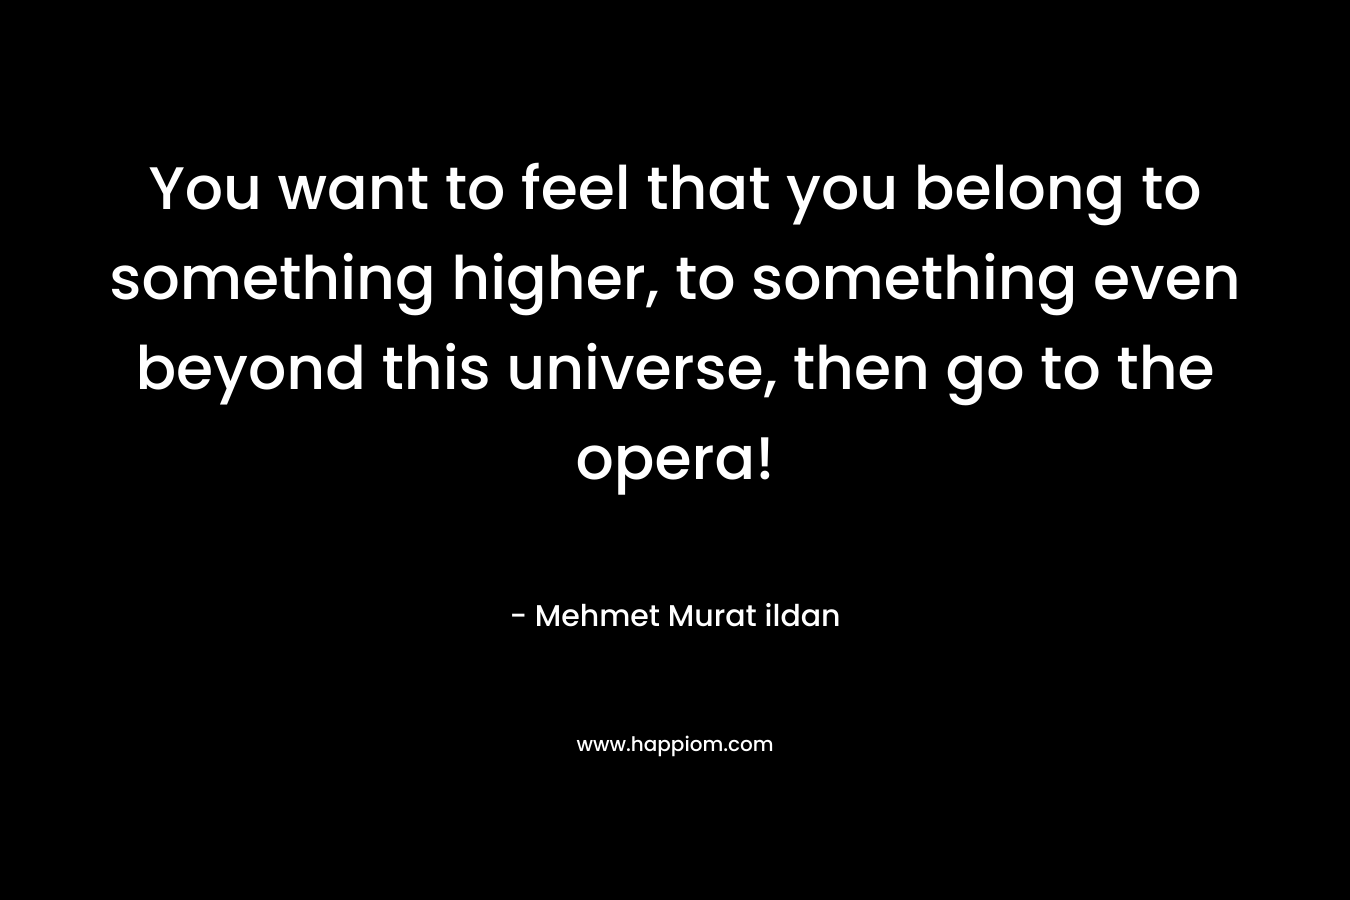 You want to feel that you belong to something higher, to something even beyond this universe, then go to the opera! – Mehmet Murat ildan